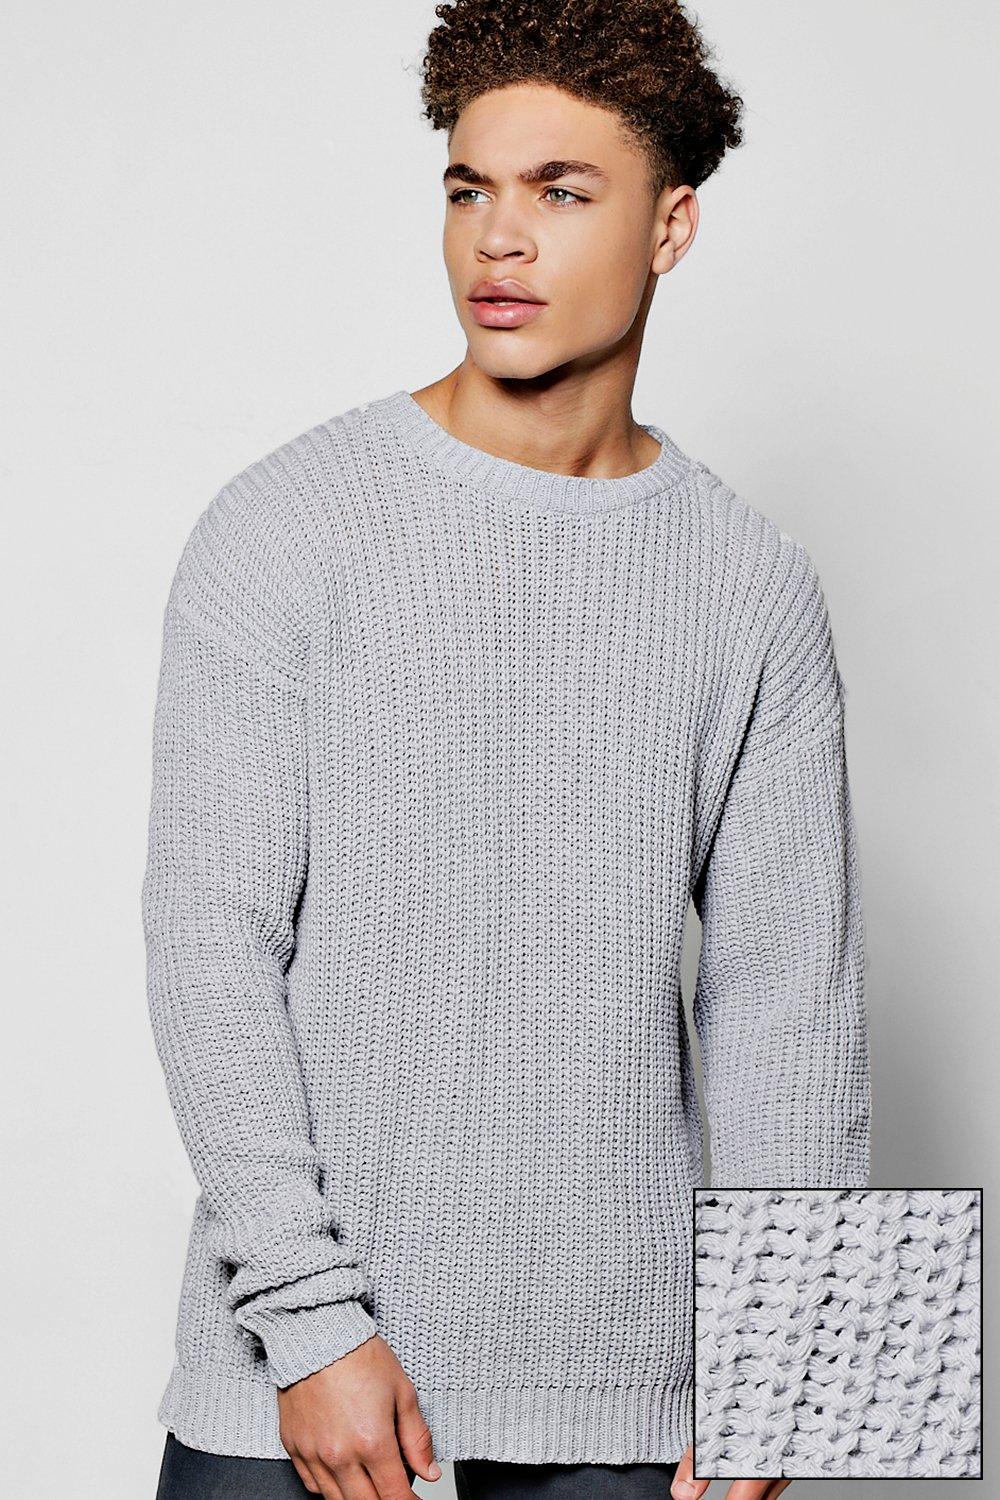 oversized mens jumpers